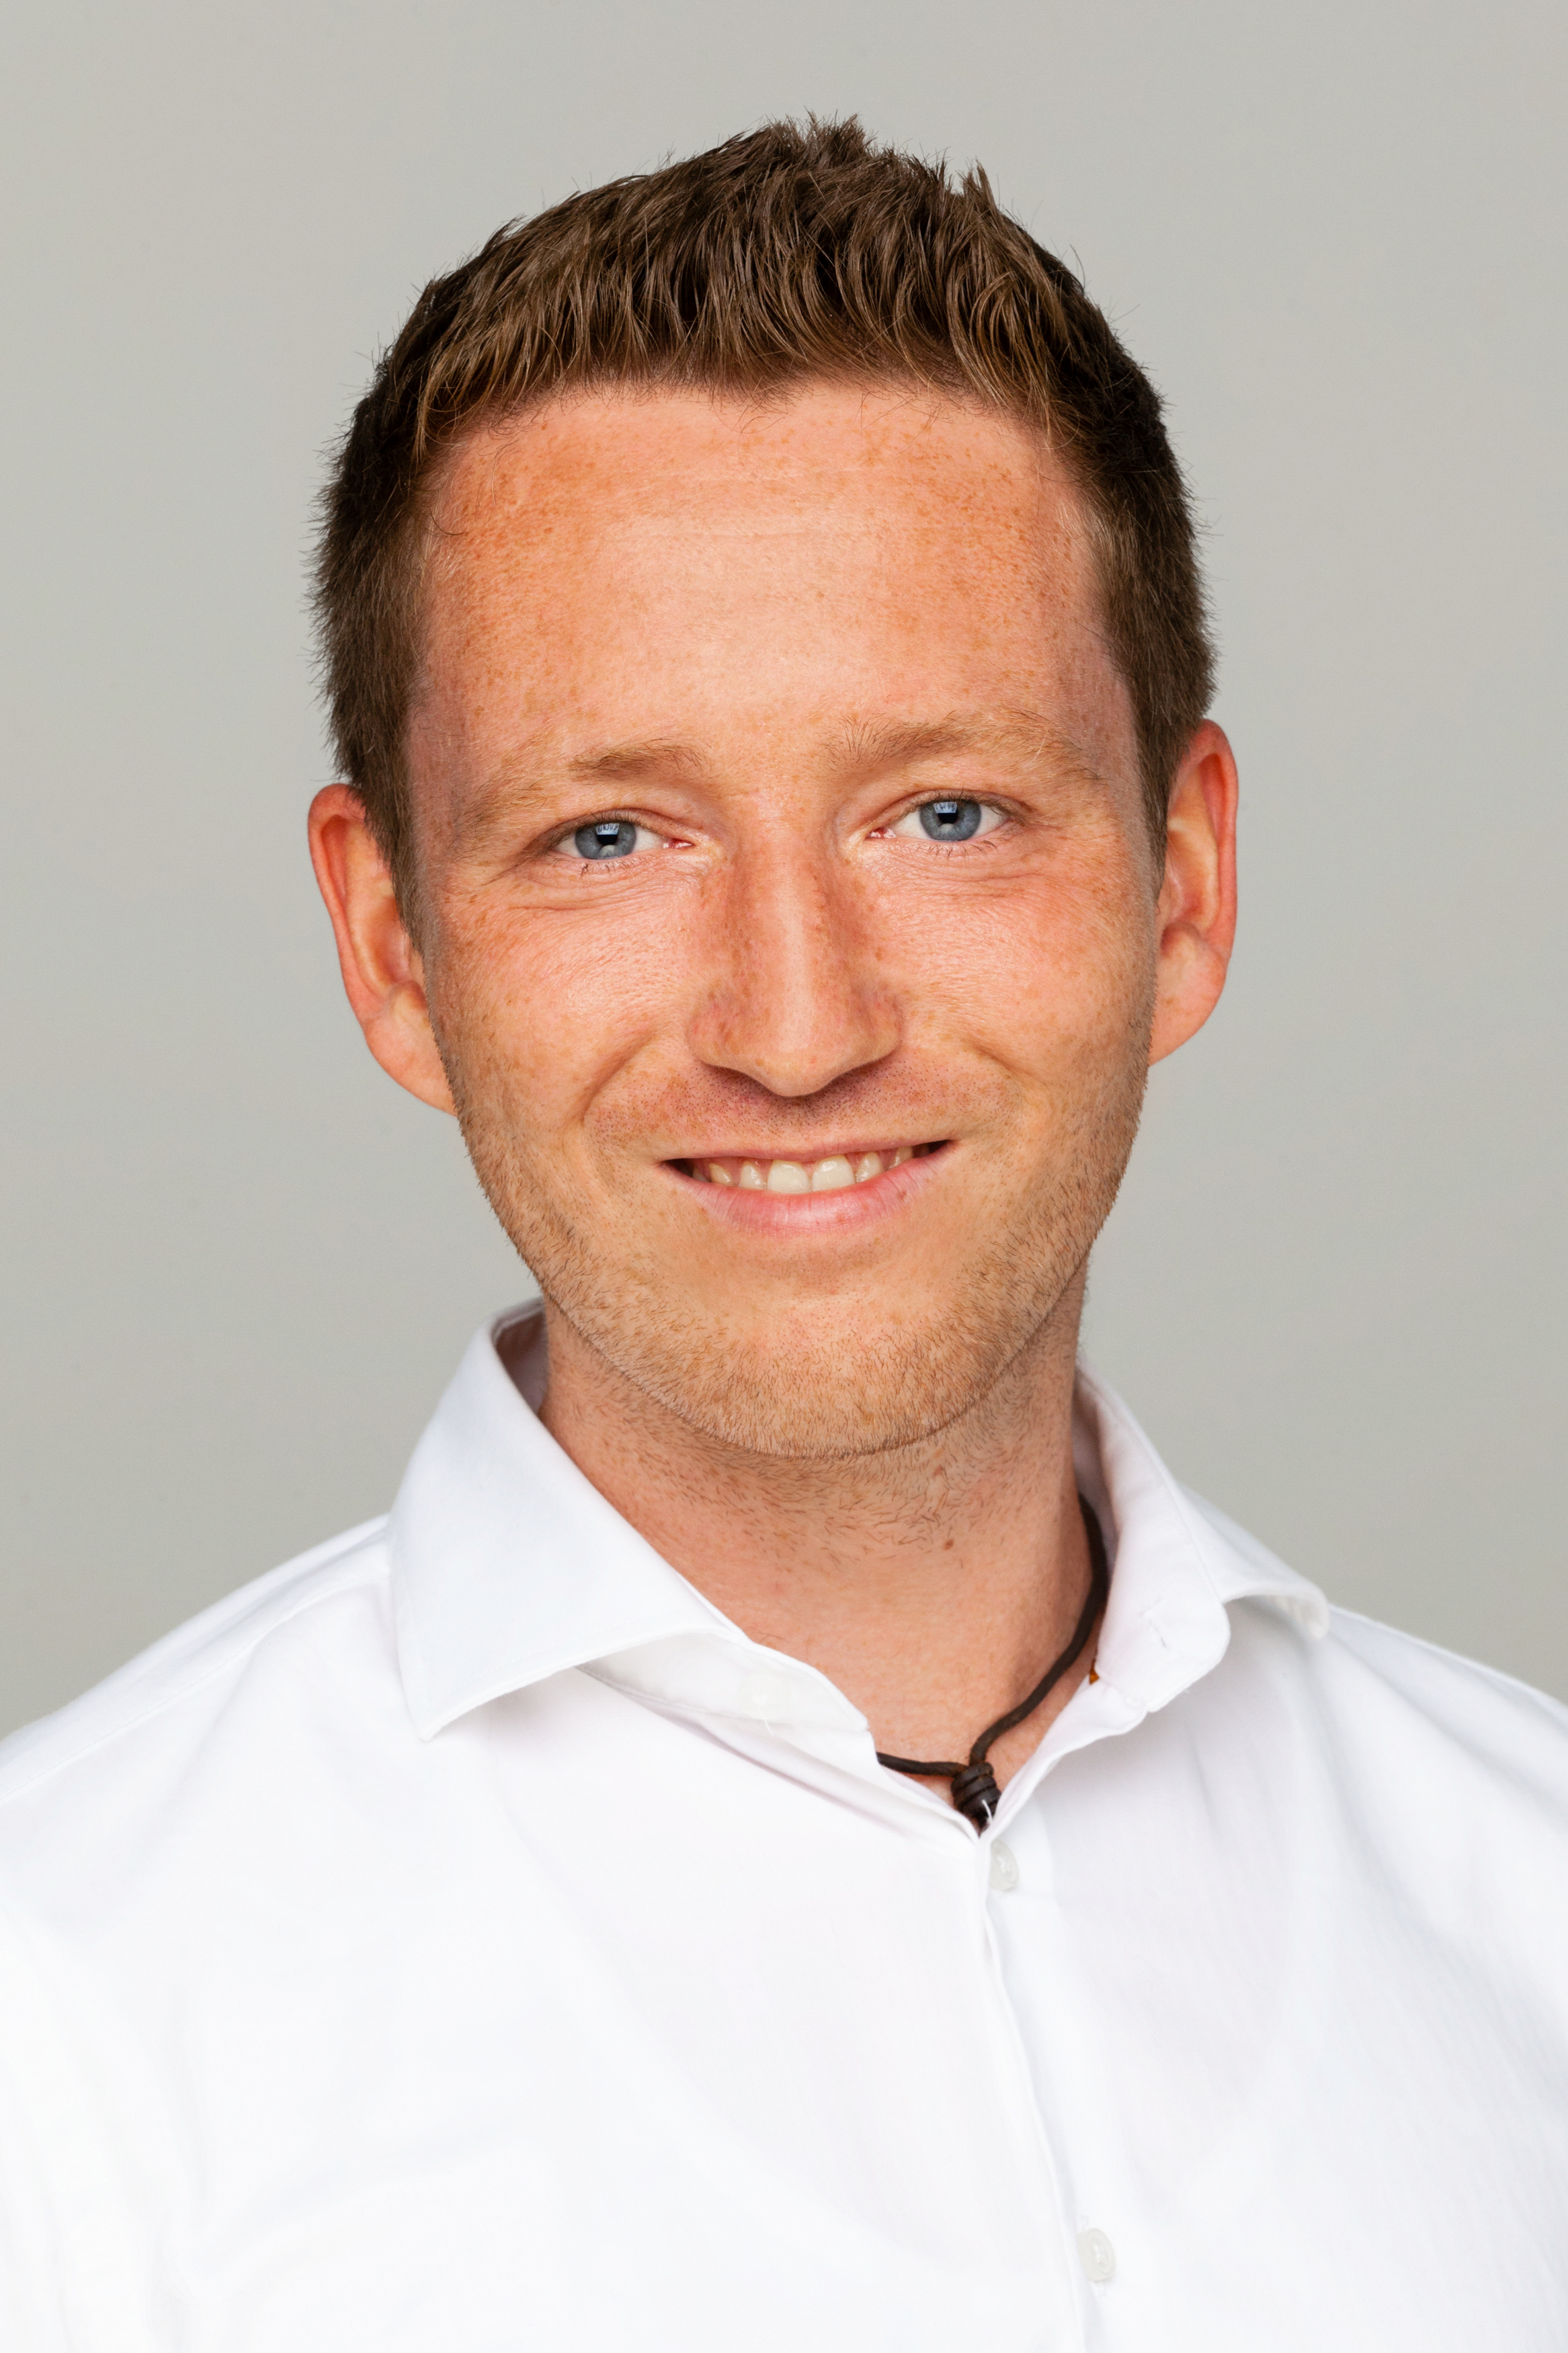 Christopher Enders is Director Brand Management & Brand Development Technology from July 2020.